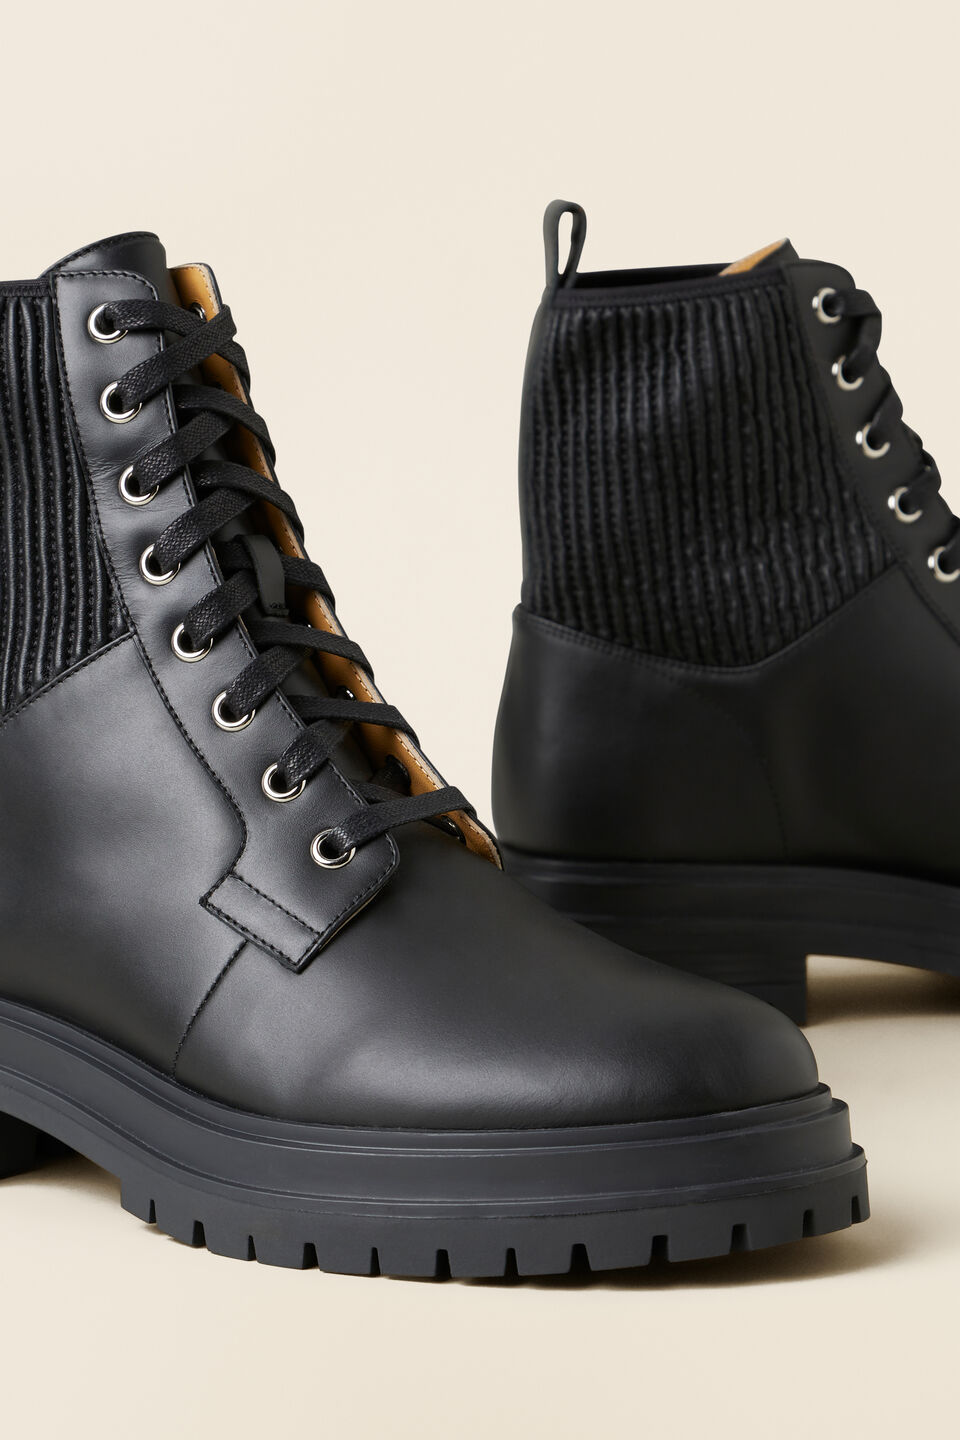 Chloe Lace Up Ankle Boot  Black  hi-res